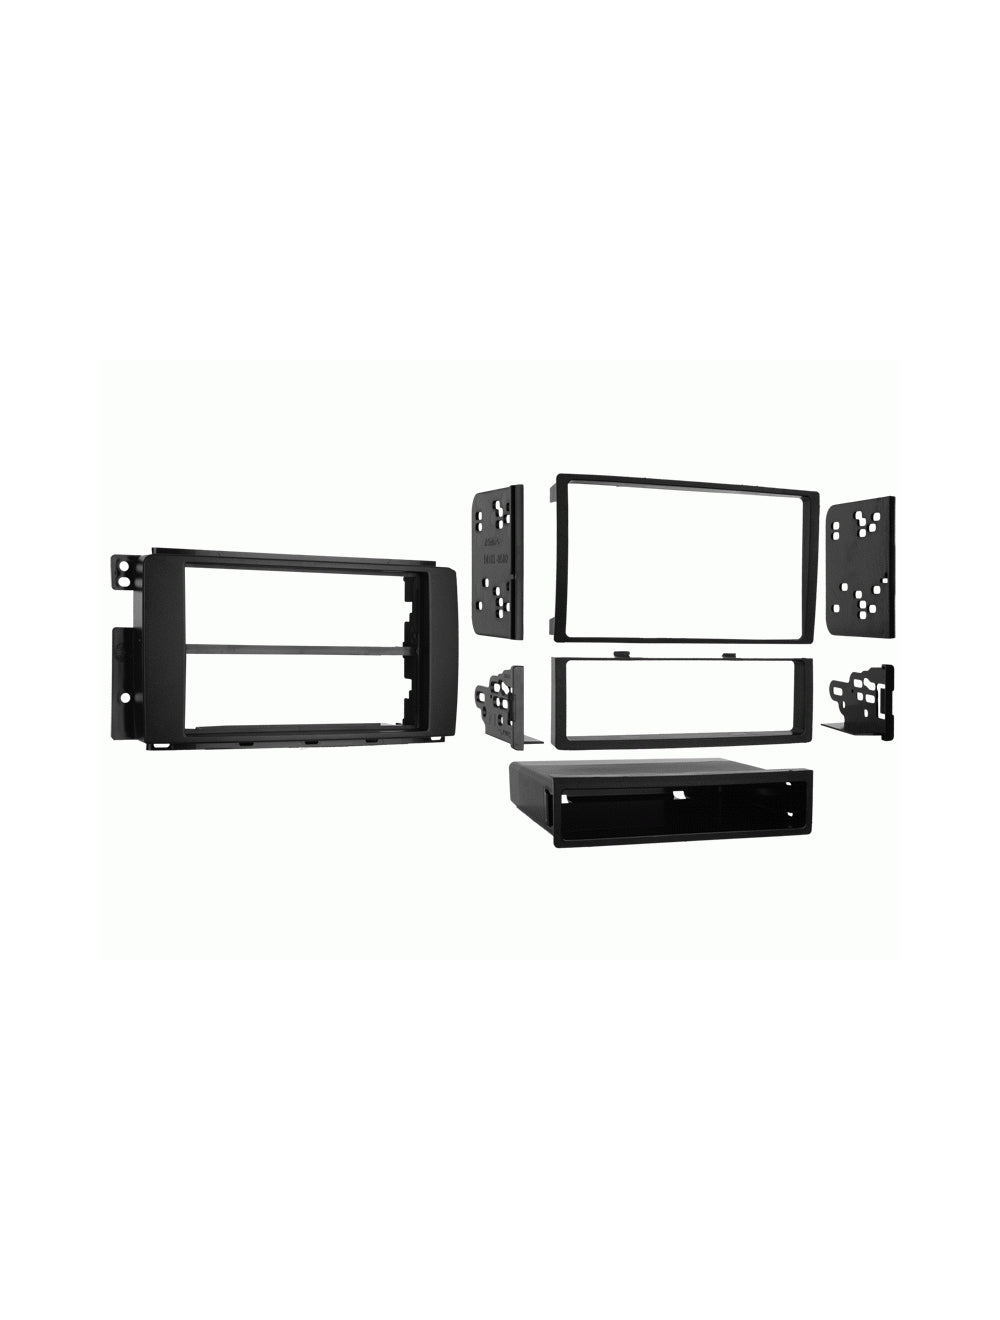 Metra 99-8715 Double DIN or Single DIN Installation Dash Kit for 2008-2010 Smart Two